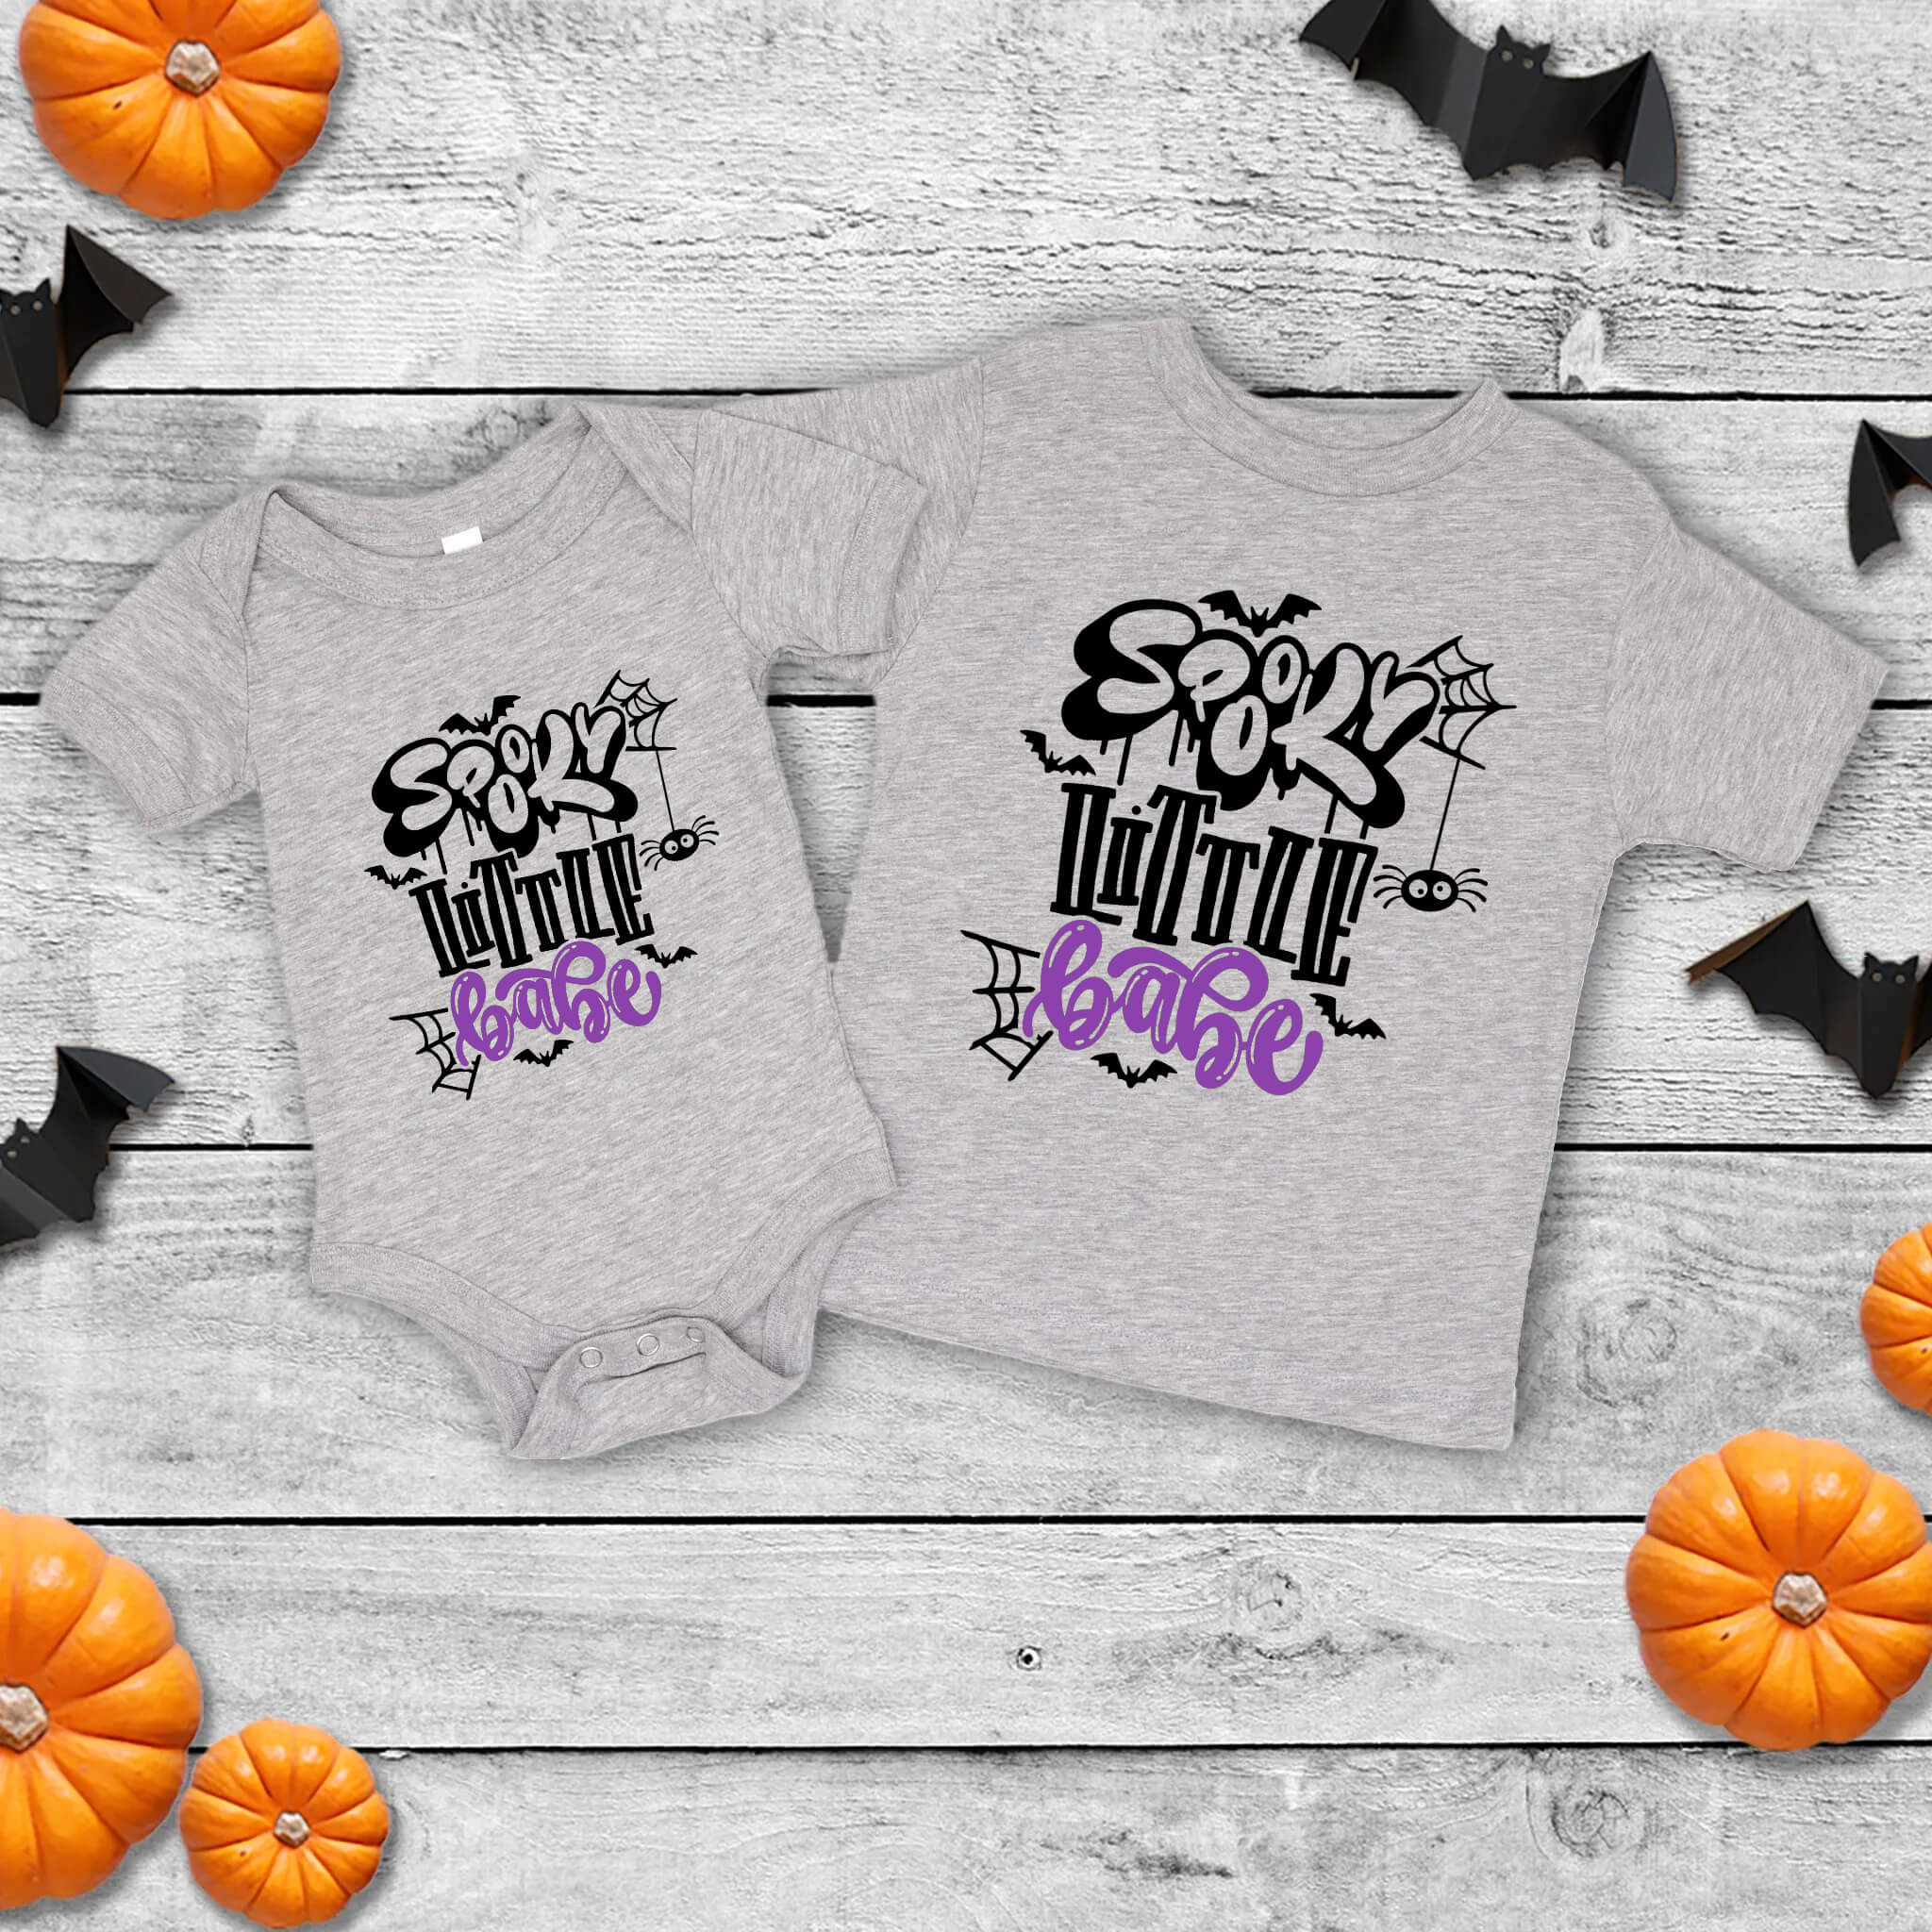 Halloween Spooky Little Babe Boy's or Girl's Customizable Baby Infant Toddler Graphic Print